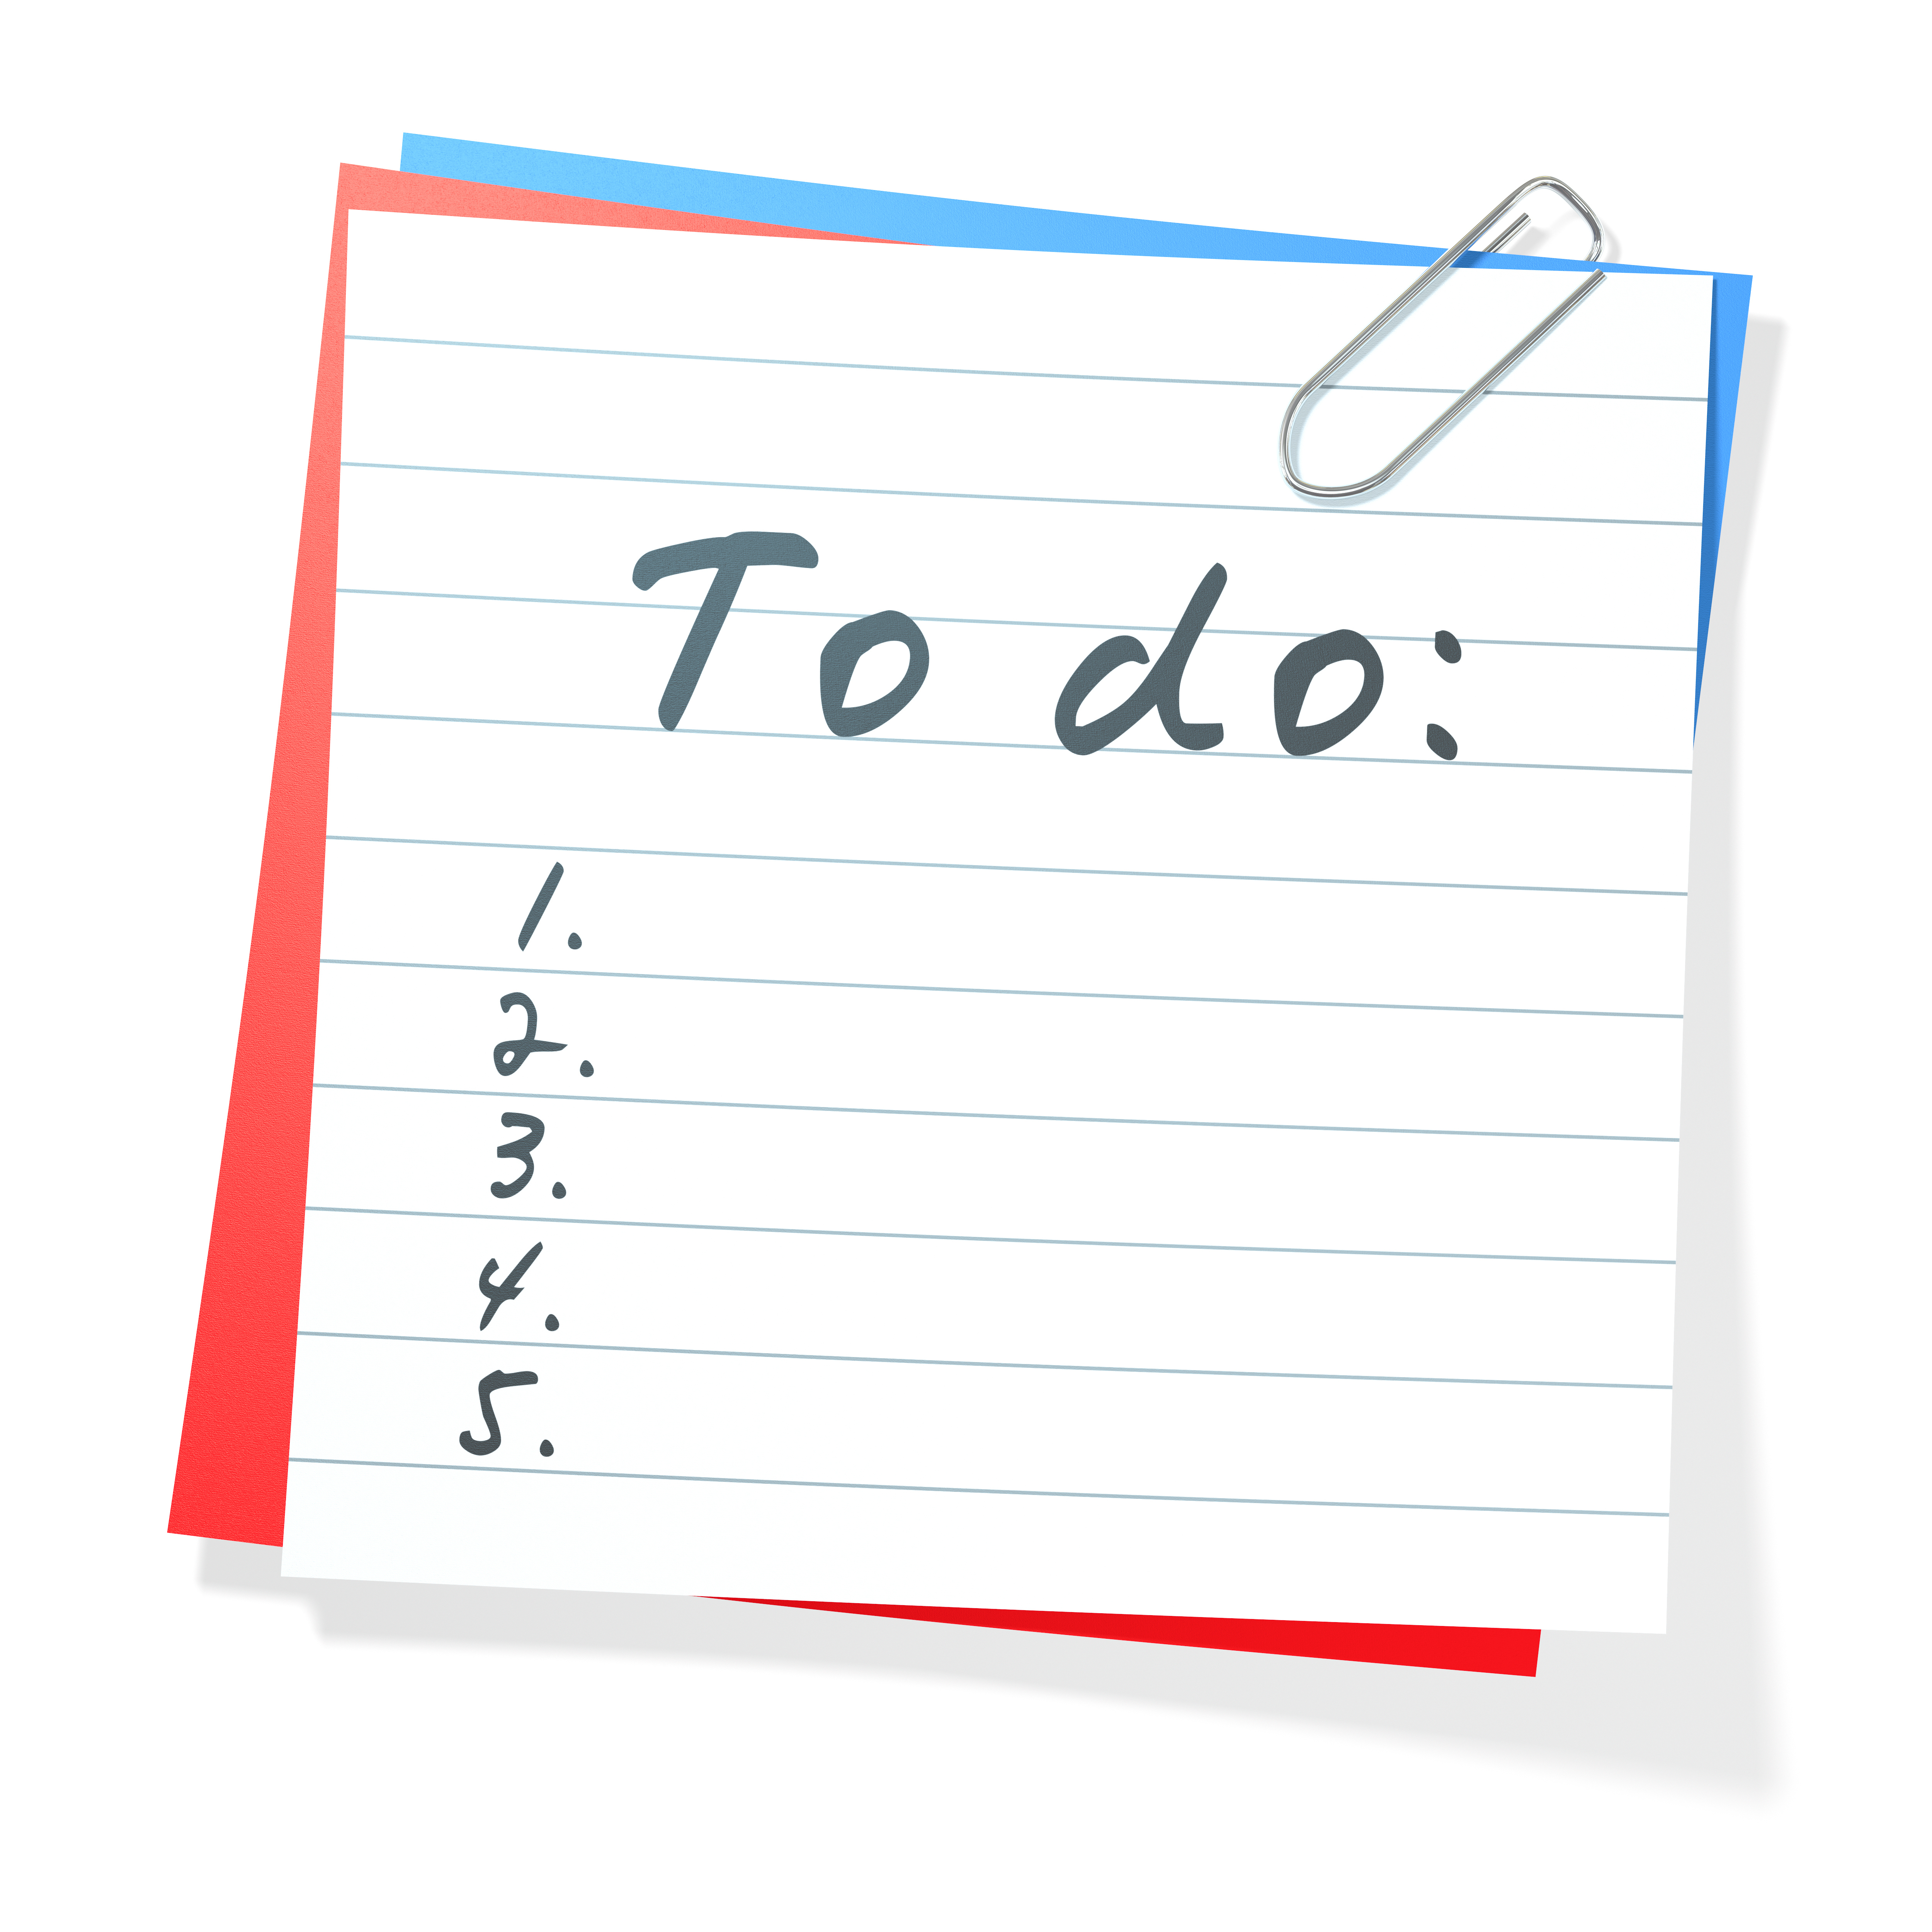 Managing “To Do” Lists